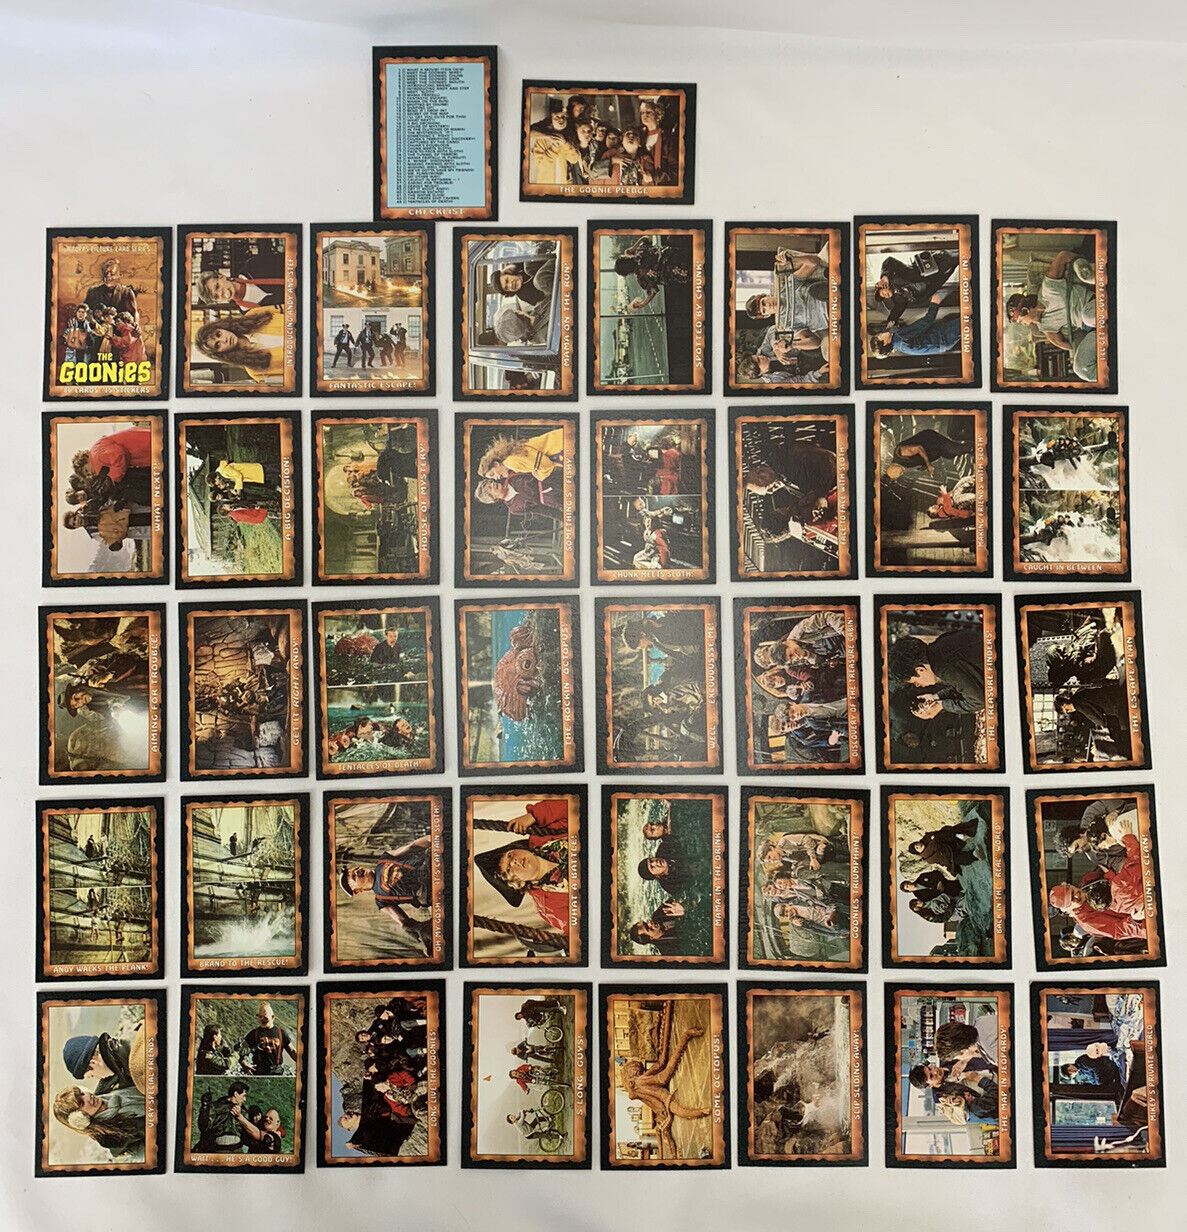 42 Goonies Cards - 1985 No Repeats - In Protective Case - See Card List